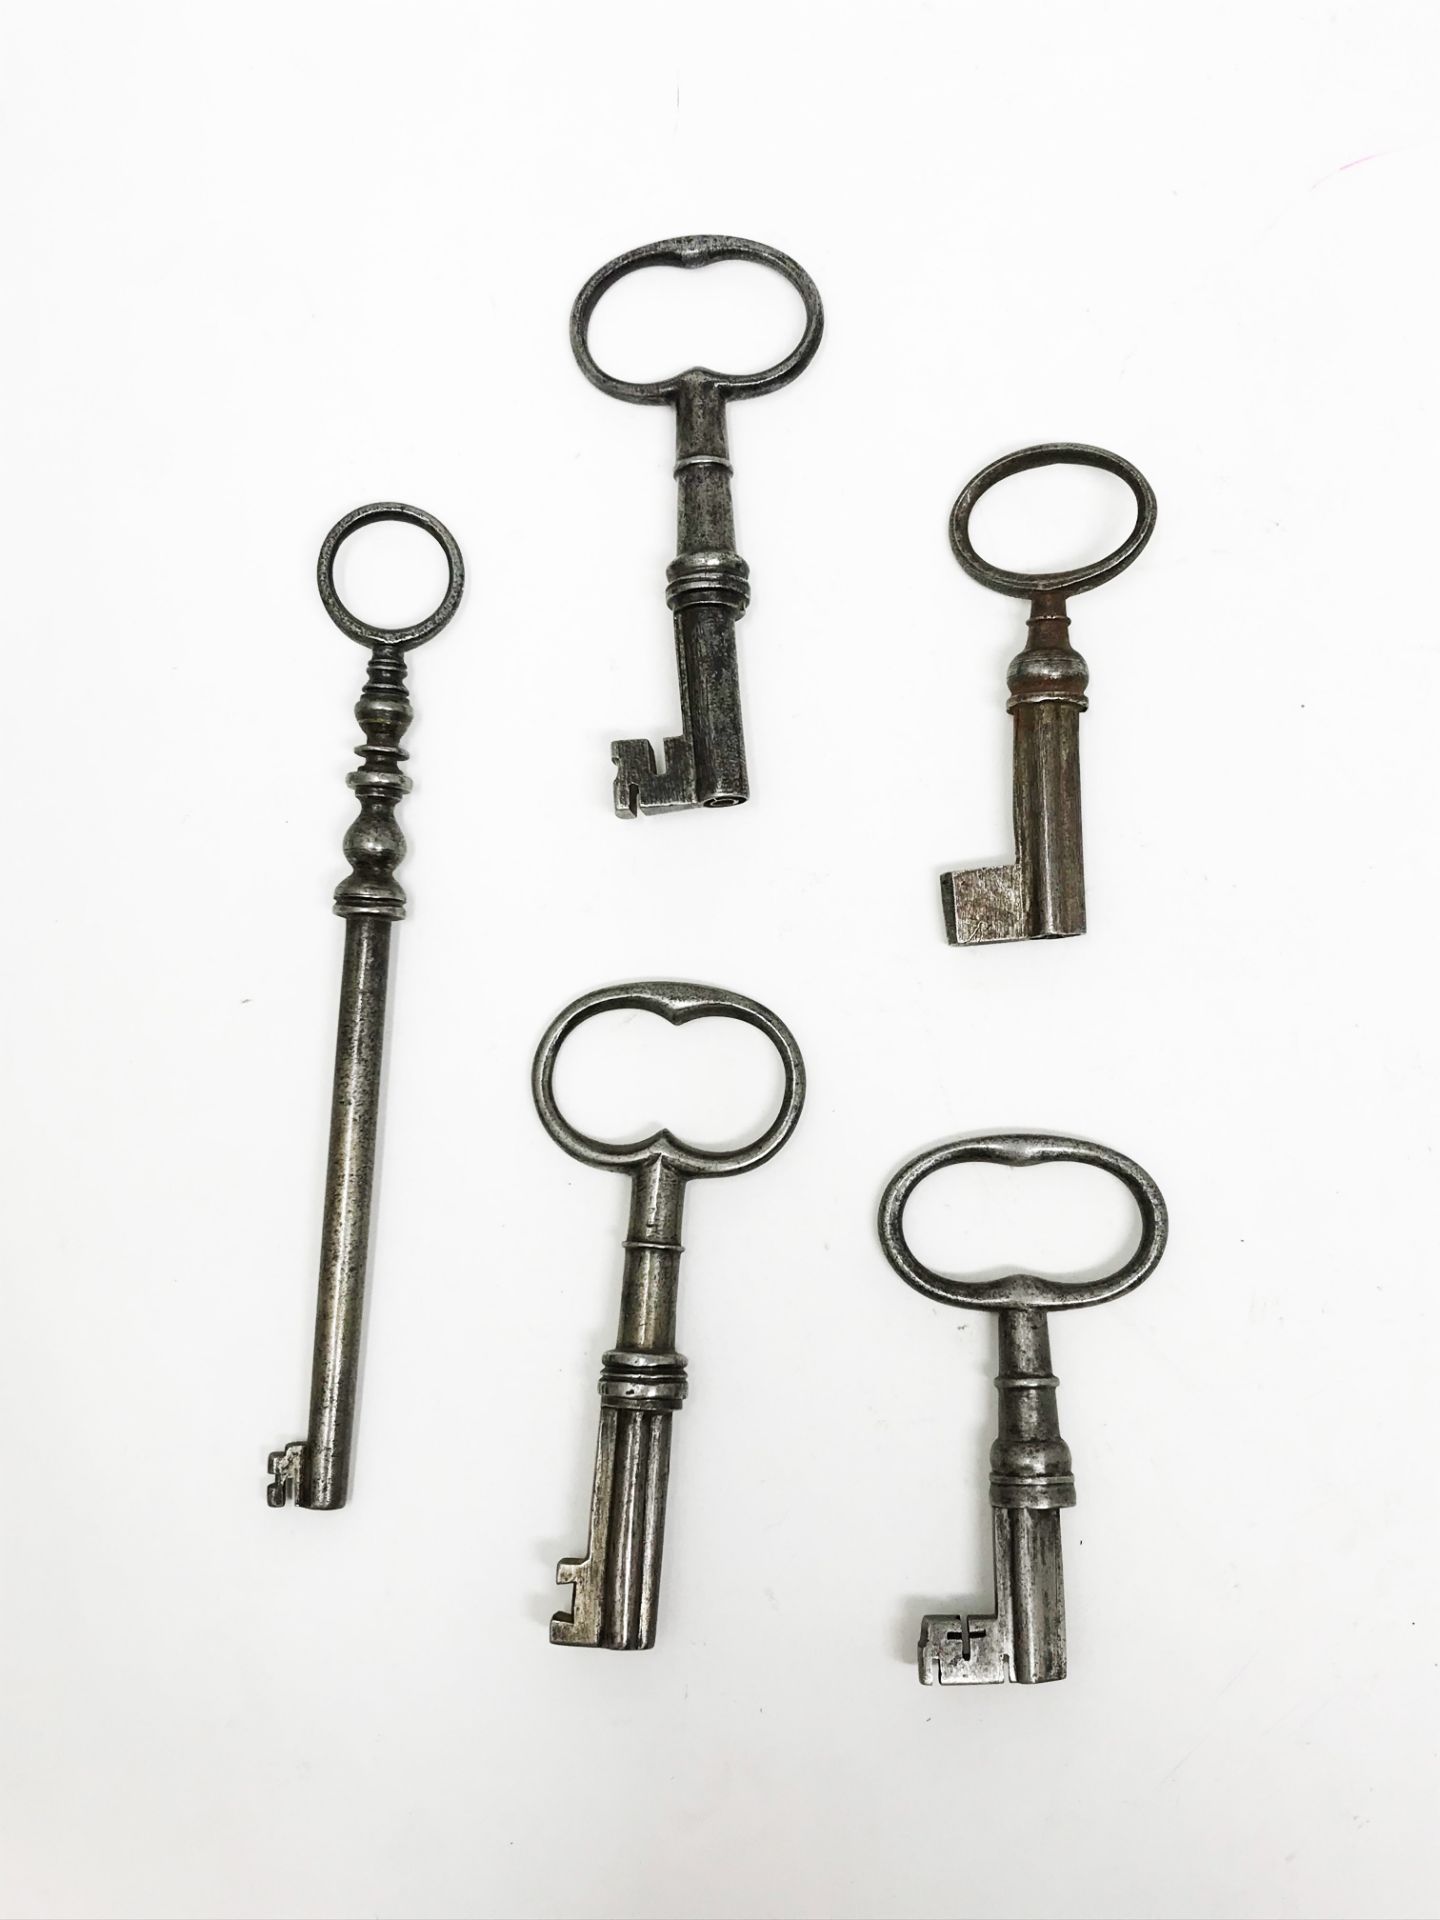 Five keys, with drilled shafts, two trefoils, one heart-shaped, one with extra long double drilling. - Image 3 of 3